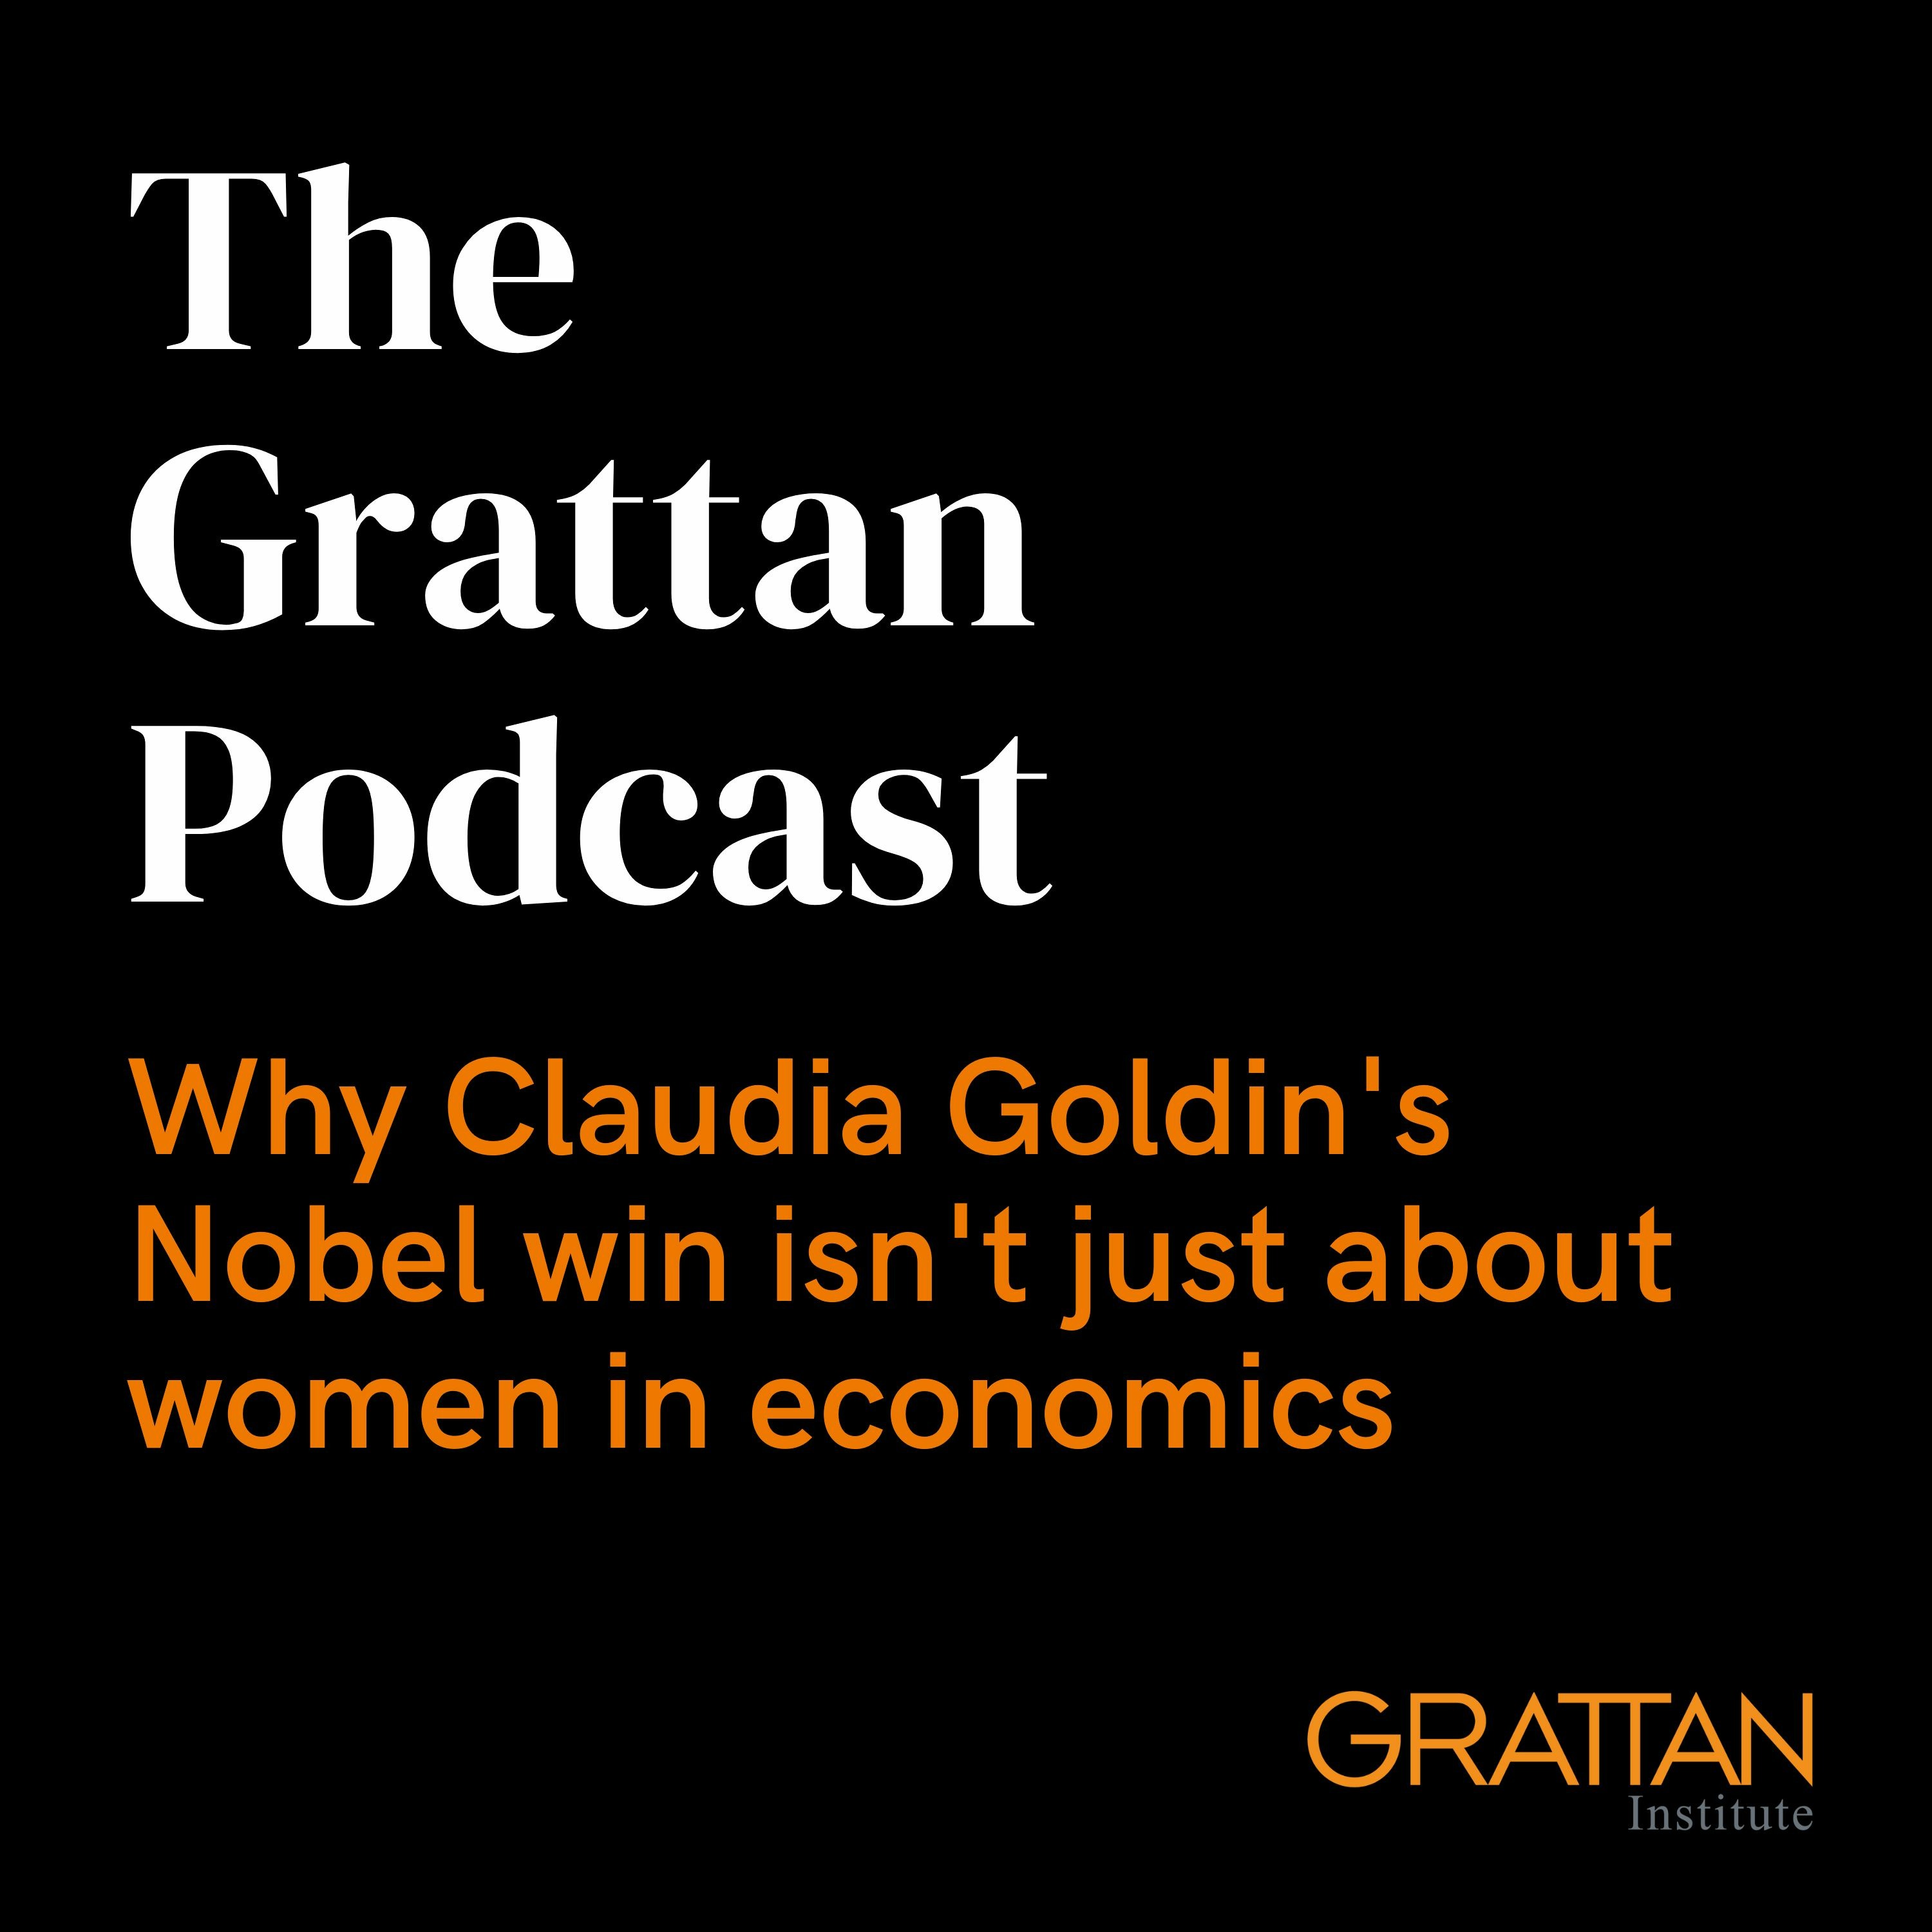 Why Claudia Goldin’s Nobel win isn’t just about women in economics